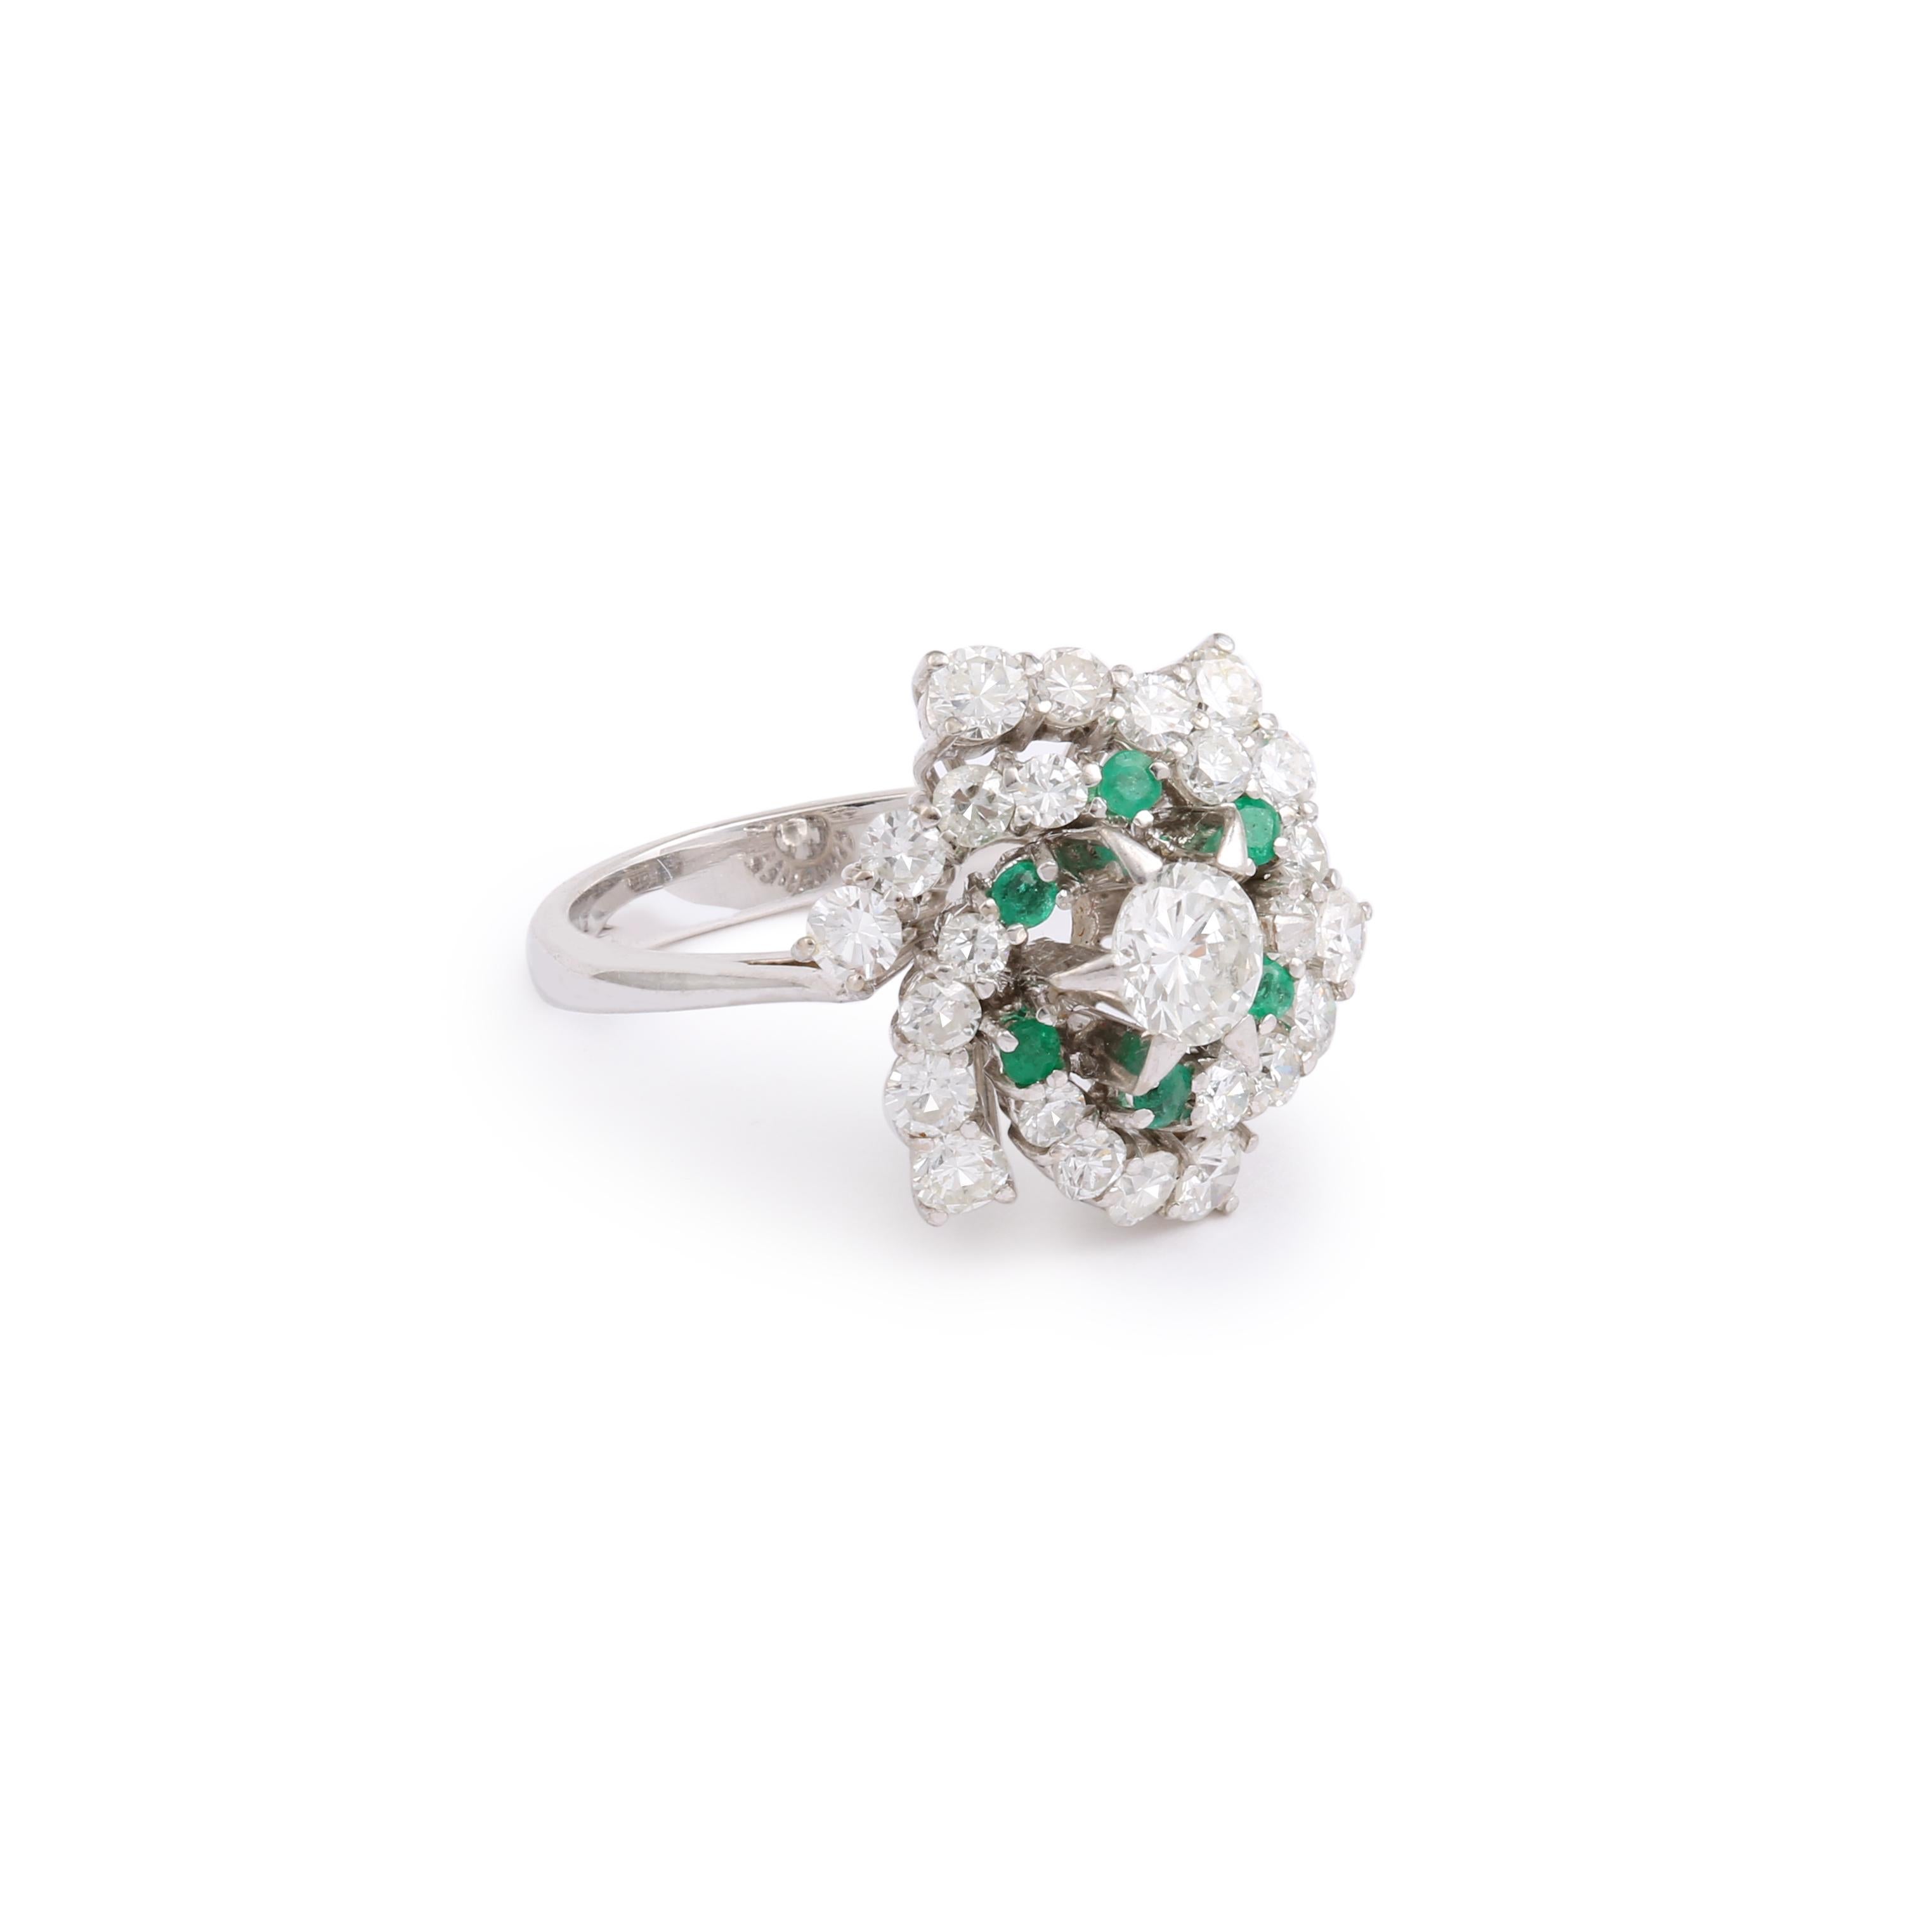 White gold ring set with diamonds and emeralds forming a whirlwind motif.

Estimated weight of the central diamond: 0.40 carats

Total estimated weight of the whrilwind diamonds: 1 carat

Total estimated weight of emeralds : 0.08 carats

Dimensions: